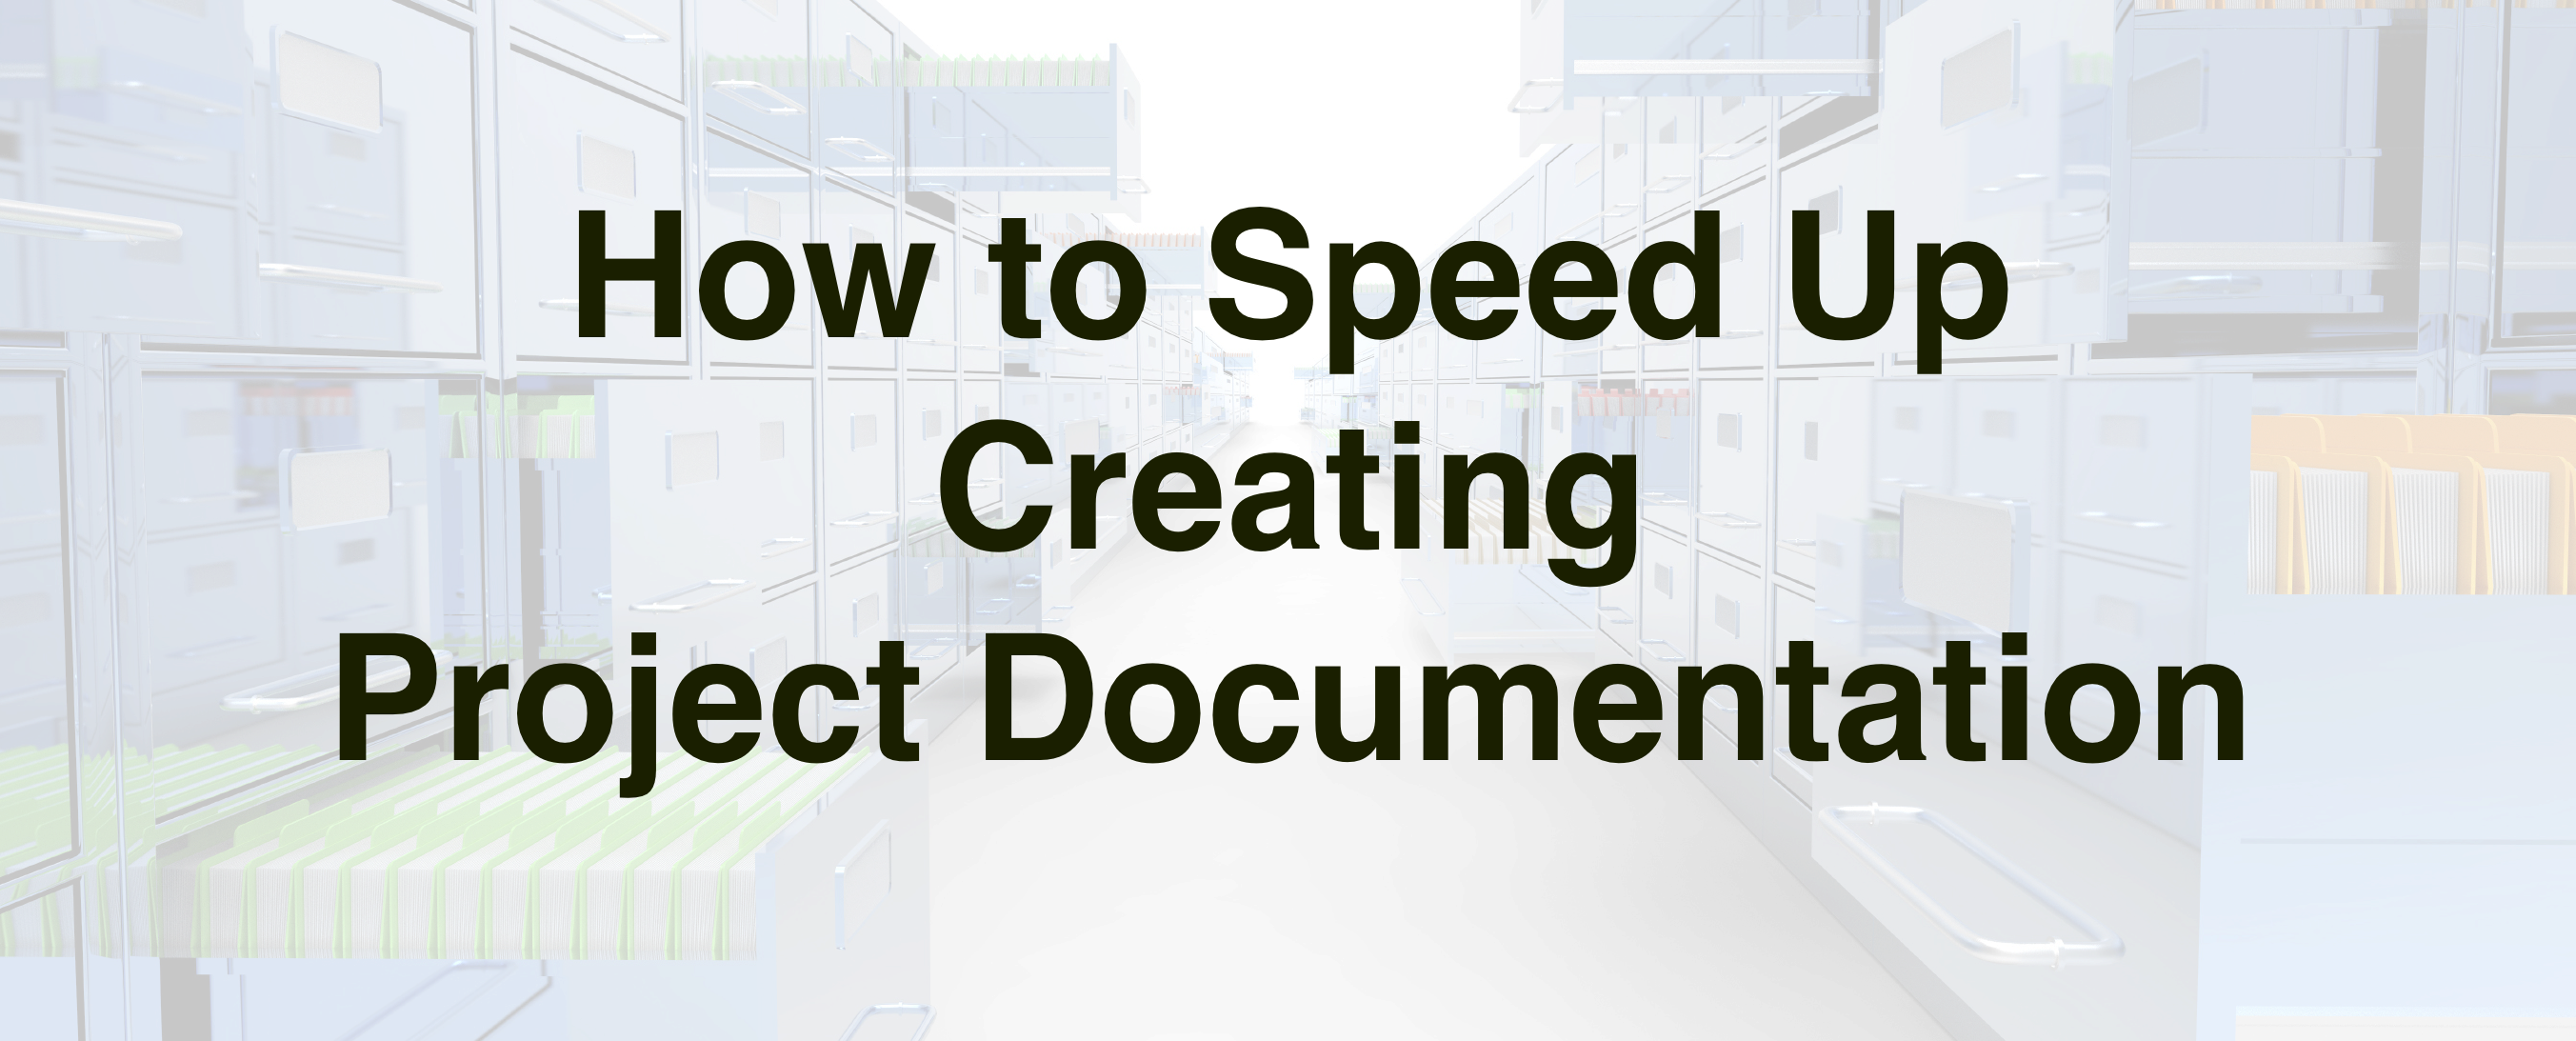 Speed Up Creating Project Documentation